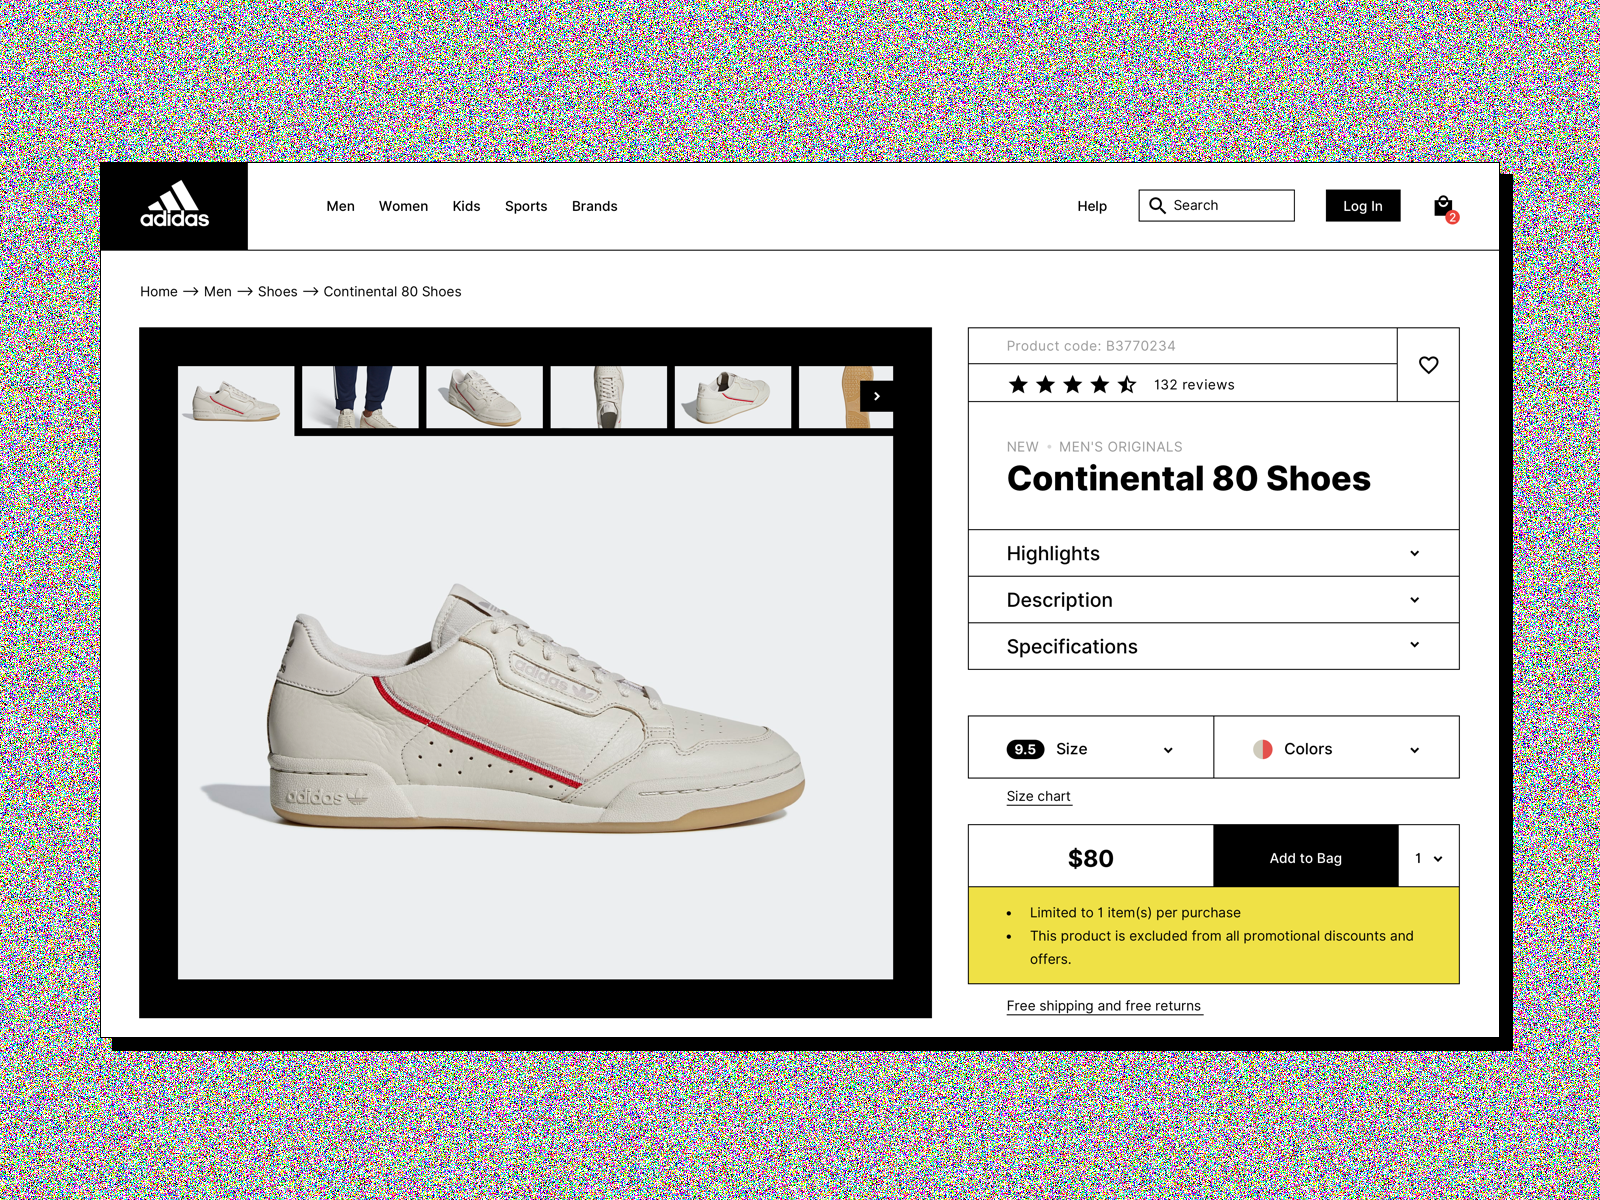 Adidas Online Store Redesign by 